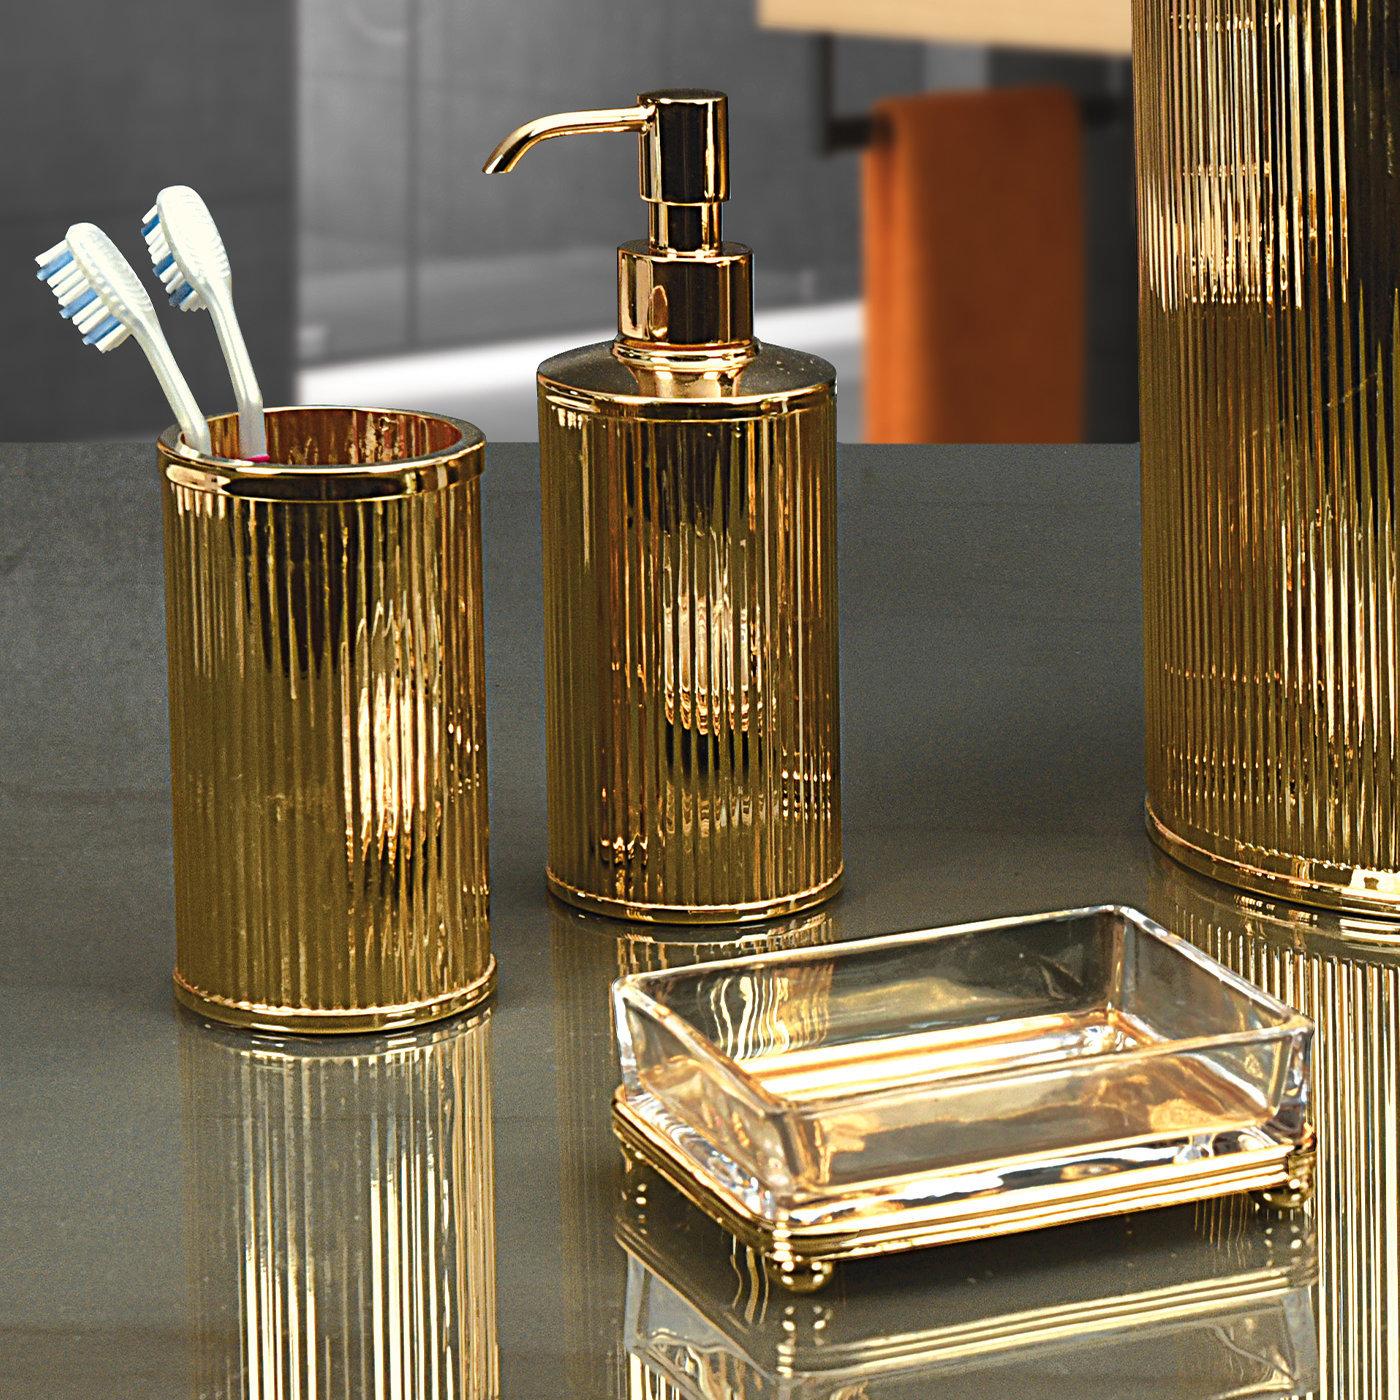 An elegant way of accessorizing a traditional- or modern-style bathroom, this set of toothbrush holder, soap dispenser, and soap holder exudes an utterly lavish and sophisticated character. Handcrafted of brass and glass finished with galvanized